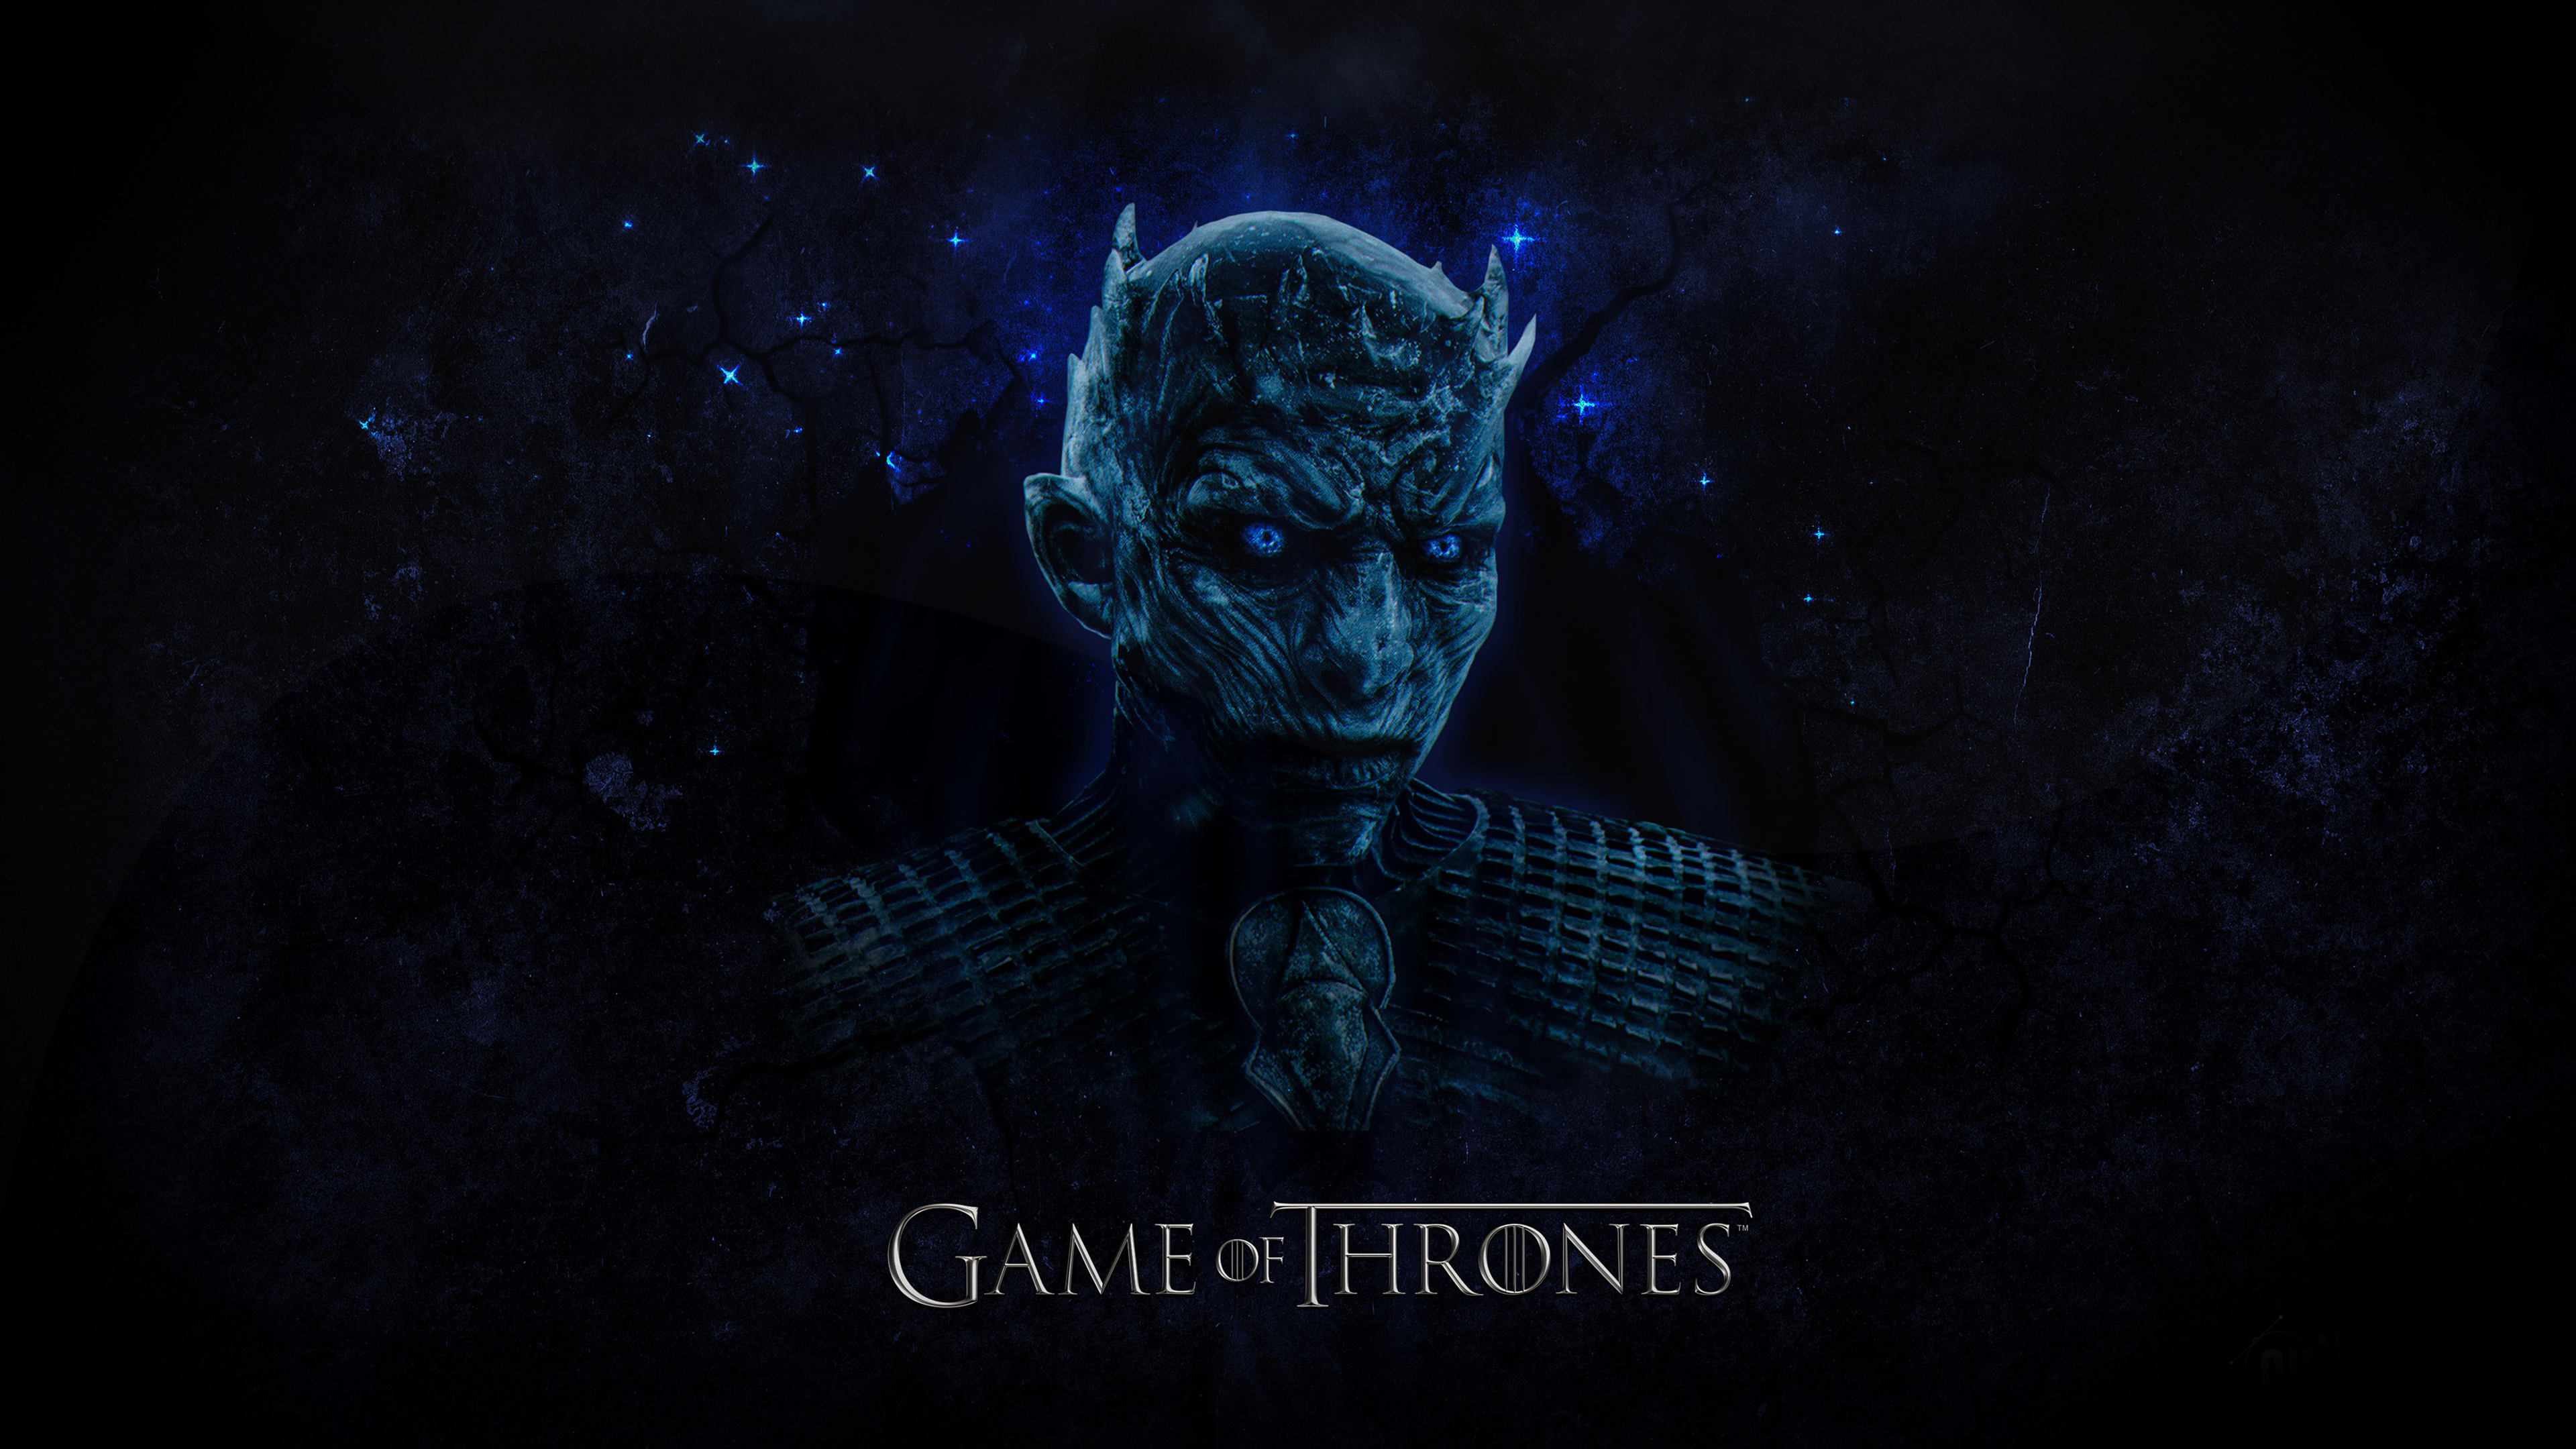 Night King in Game of Thrones 4K Wallpapers